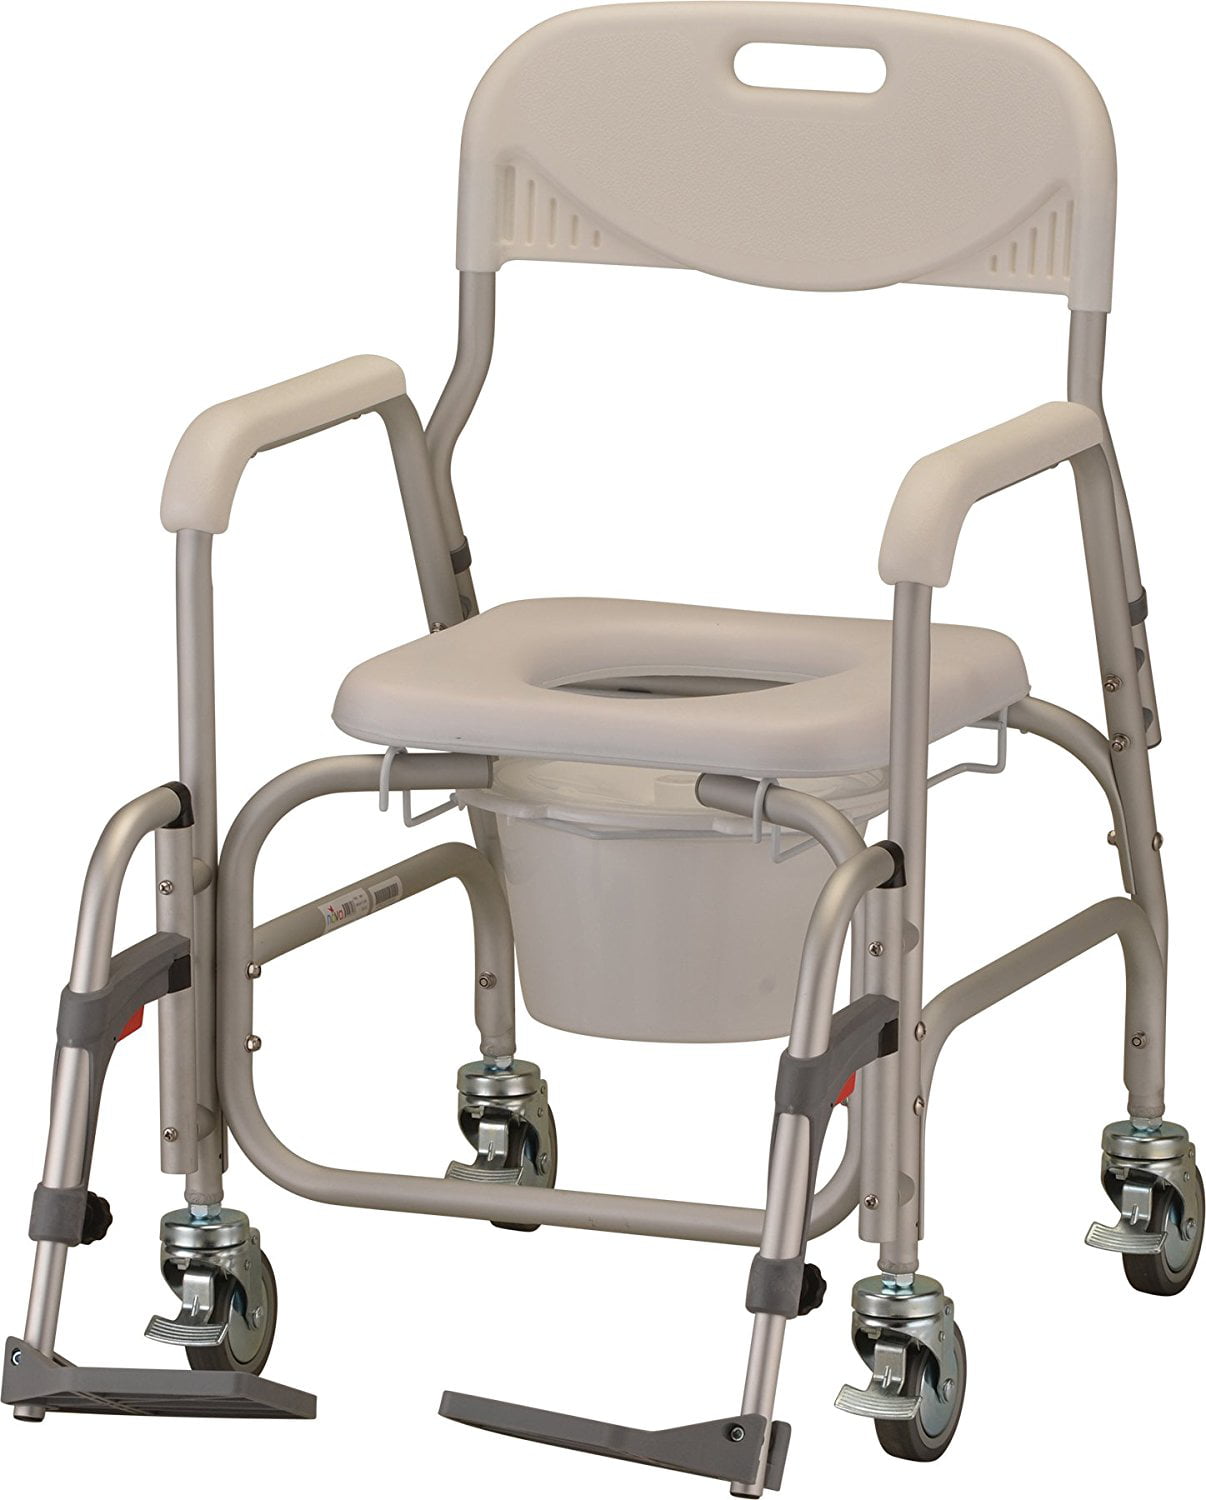 NOVA Medical Products 8801 DELUXE Shower Chair/Commode - Walmart.com